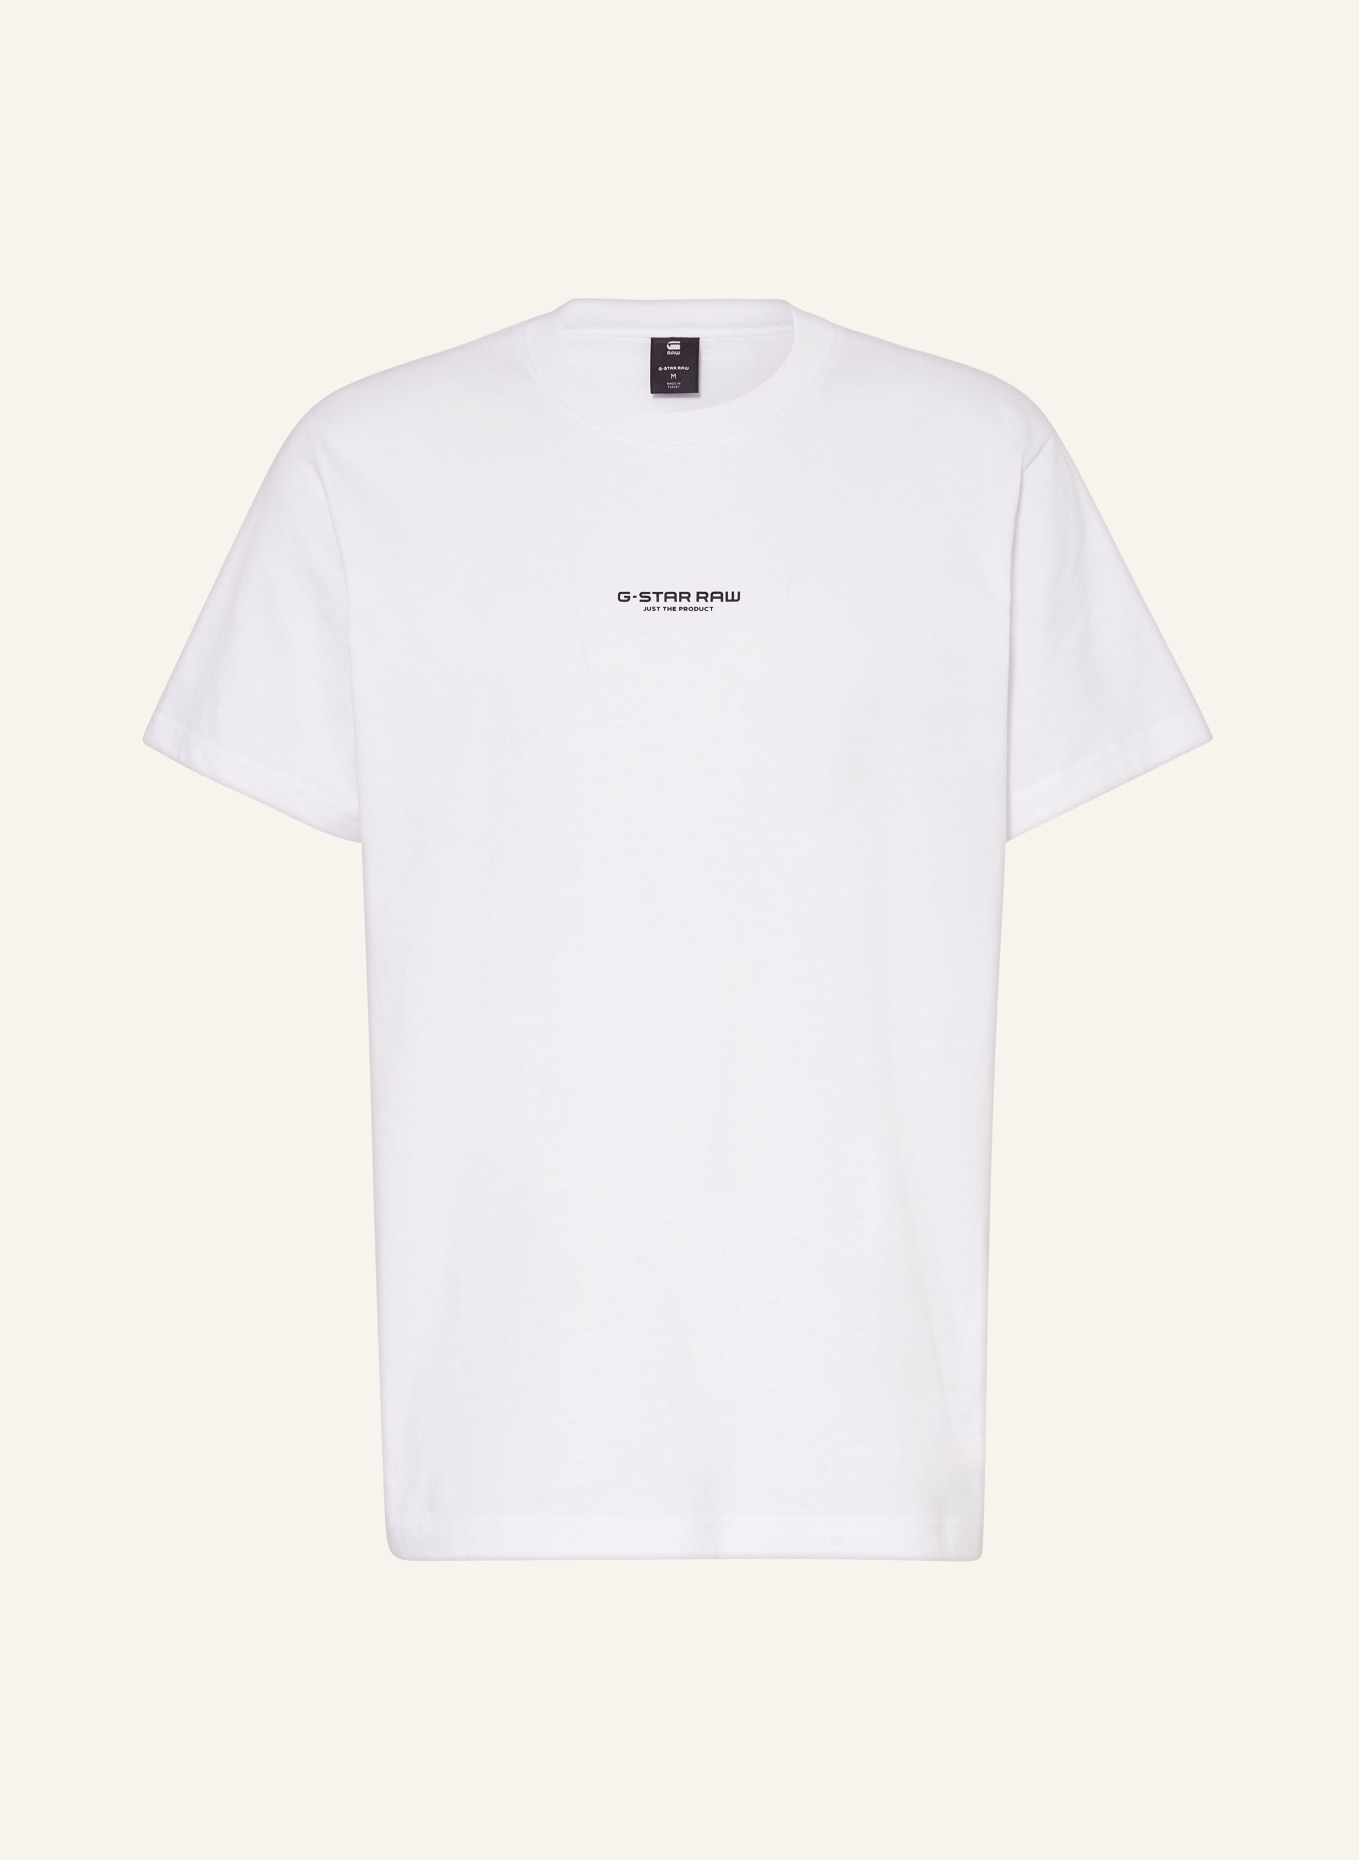 G-Star RAW T-shirt, Color: WHITE (Image 1)